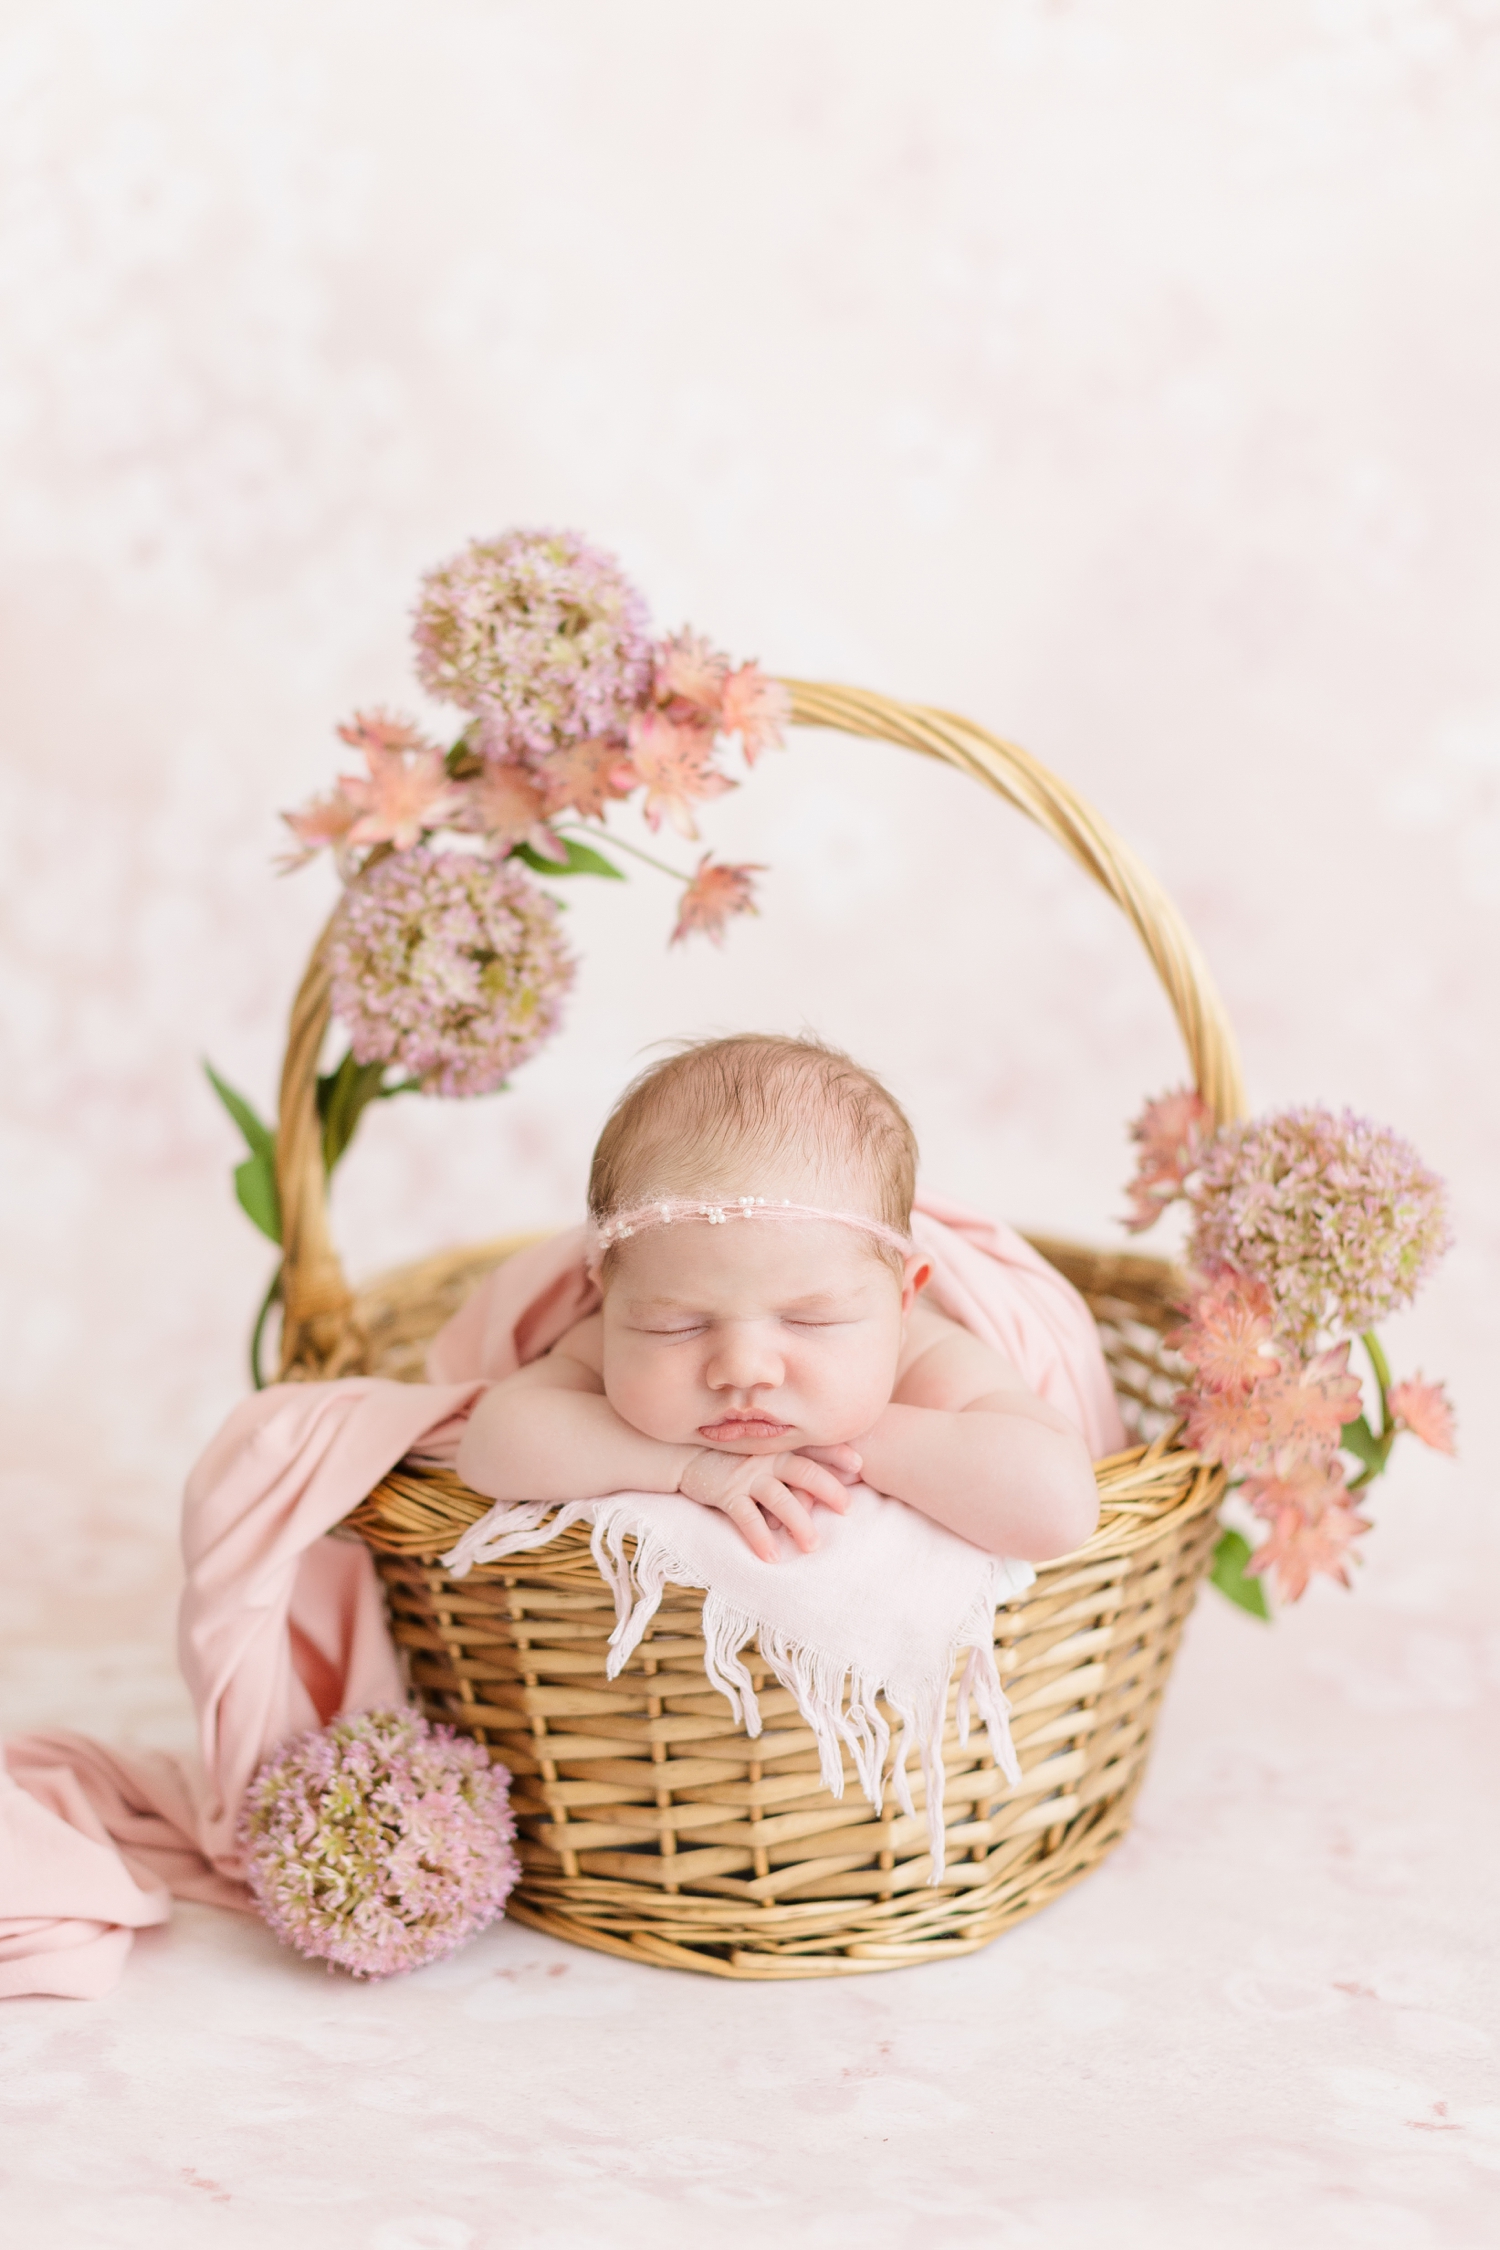 Baby Grace wrapped in pink and nestles in a wicker basket surrounded by pink flowers | CB Studio